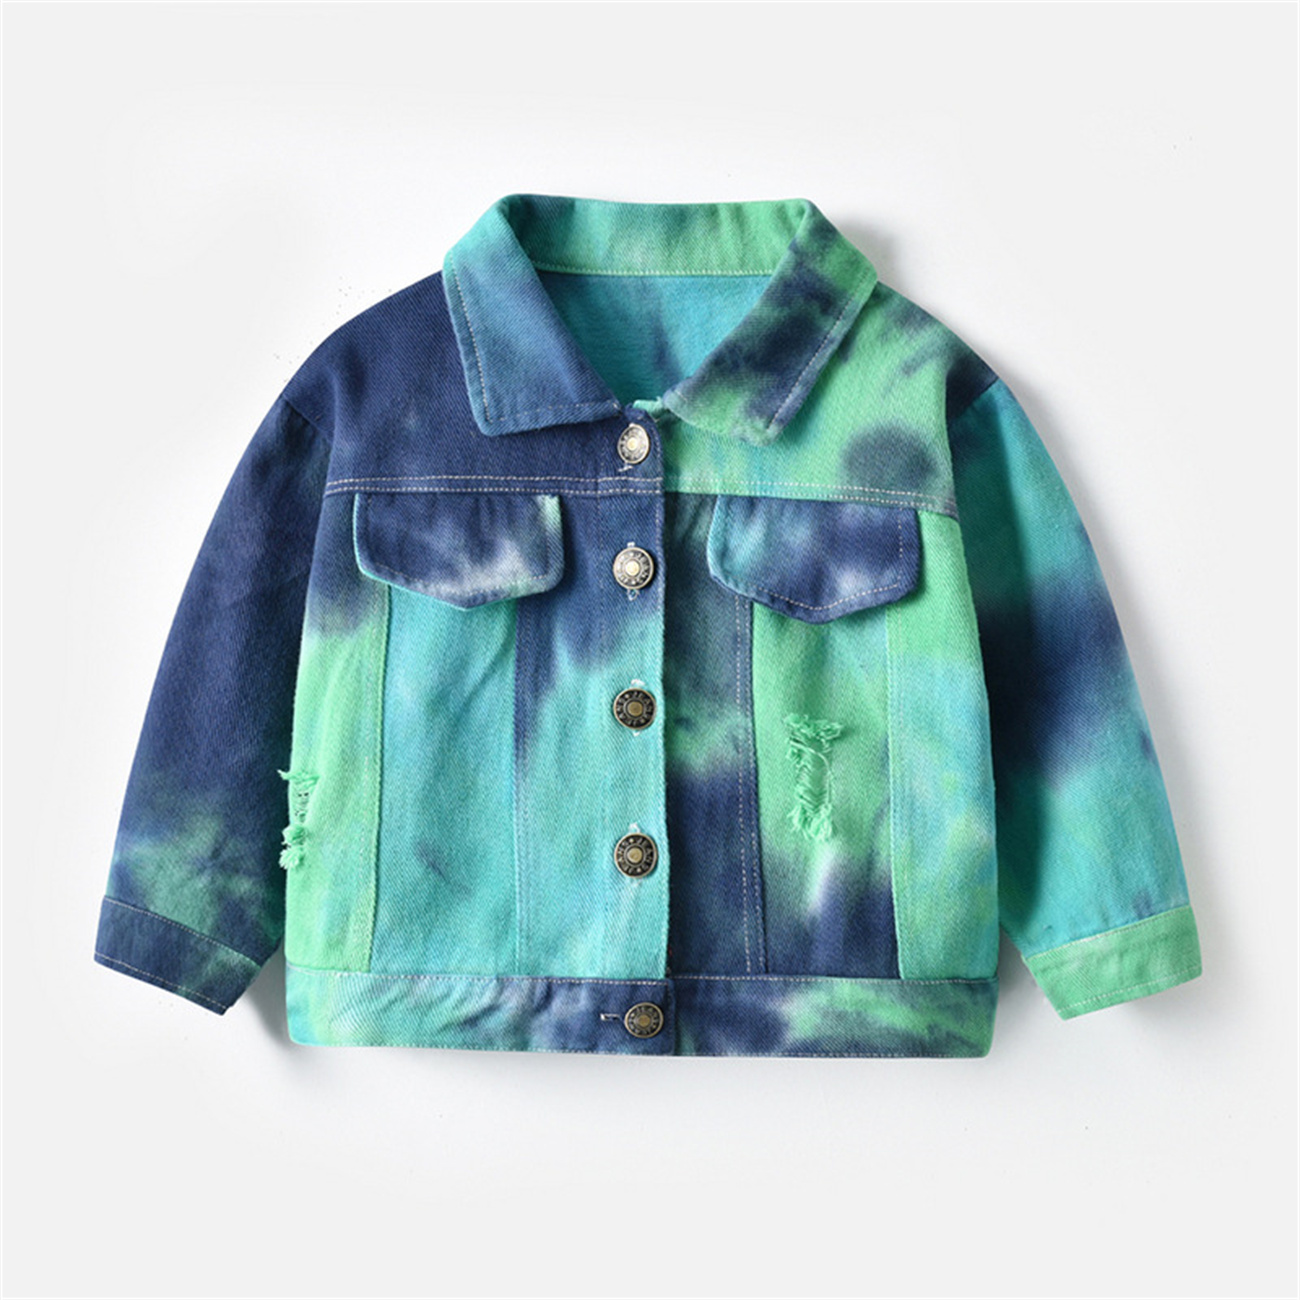 Toddler Tie-dye Denim Jean Jacket for Girls Boys Size 1-7T Single-breasted Mid-length Jacket for Spring Fall,Green,2-3 Years - image 1 of 1